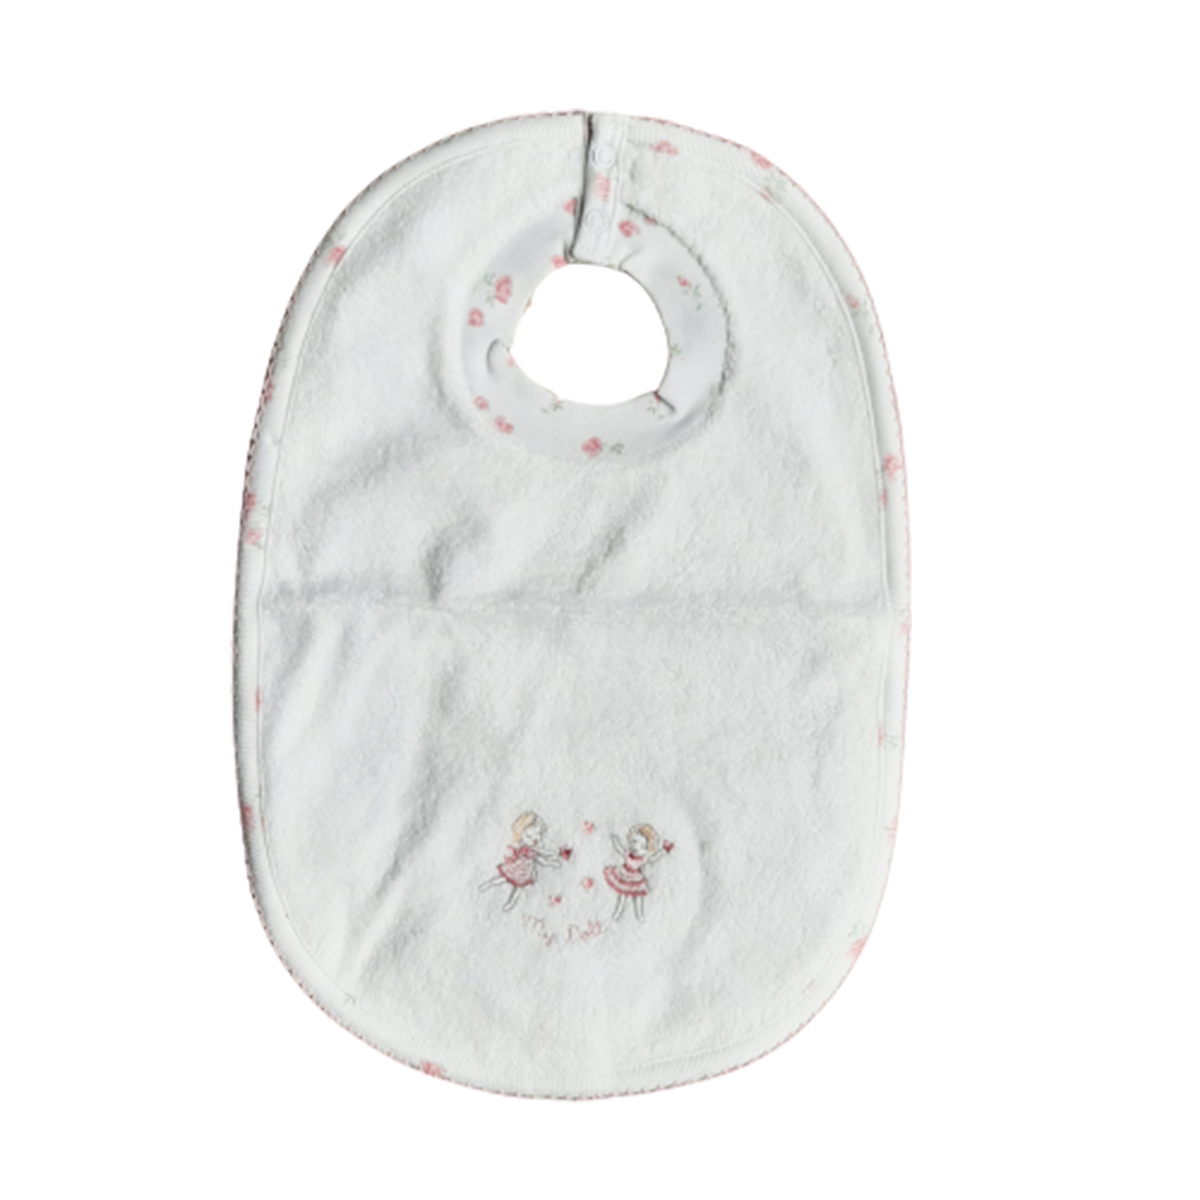 Babero Babycottons Comer My Doll C/Impermeable Blanco Rosa